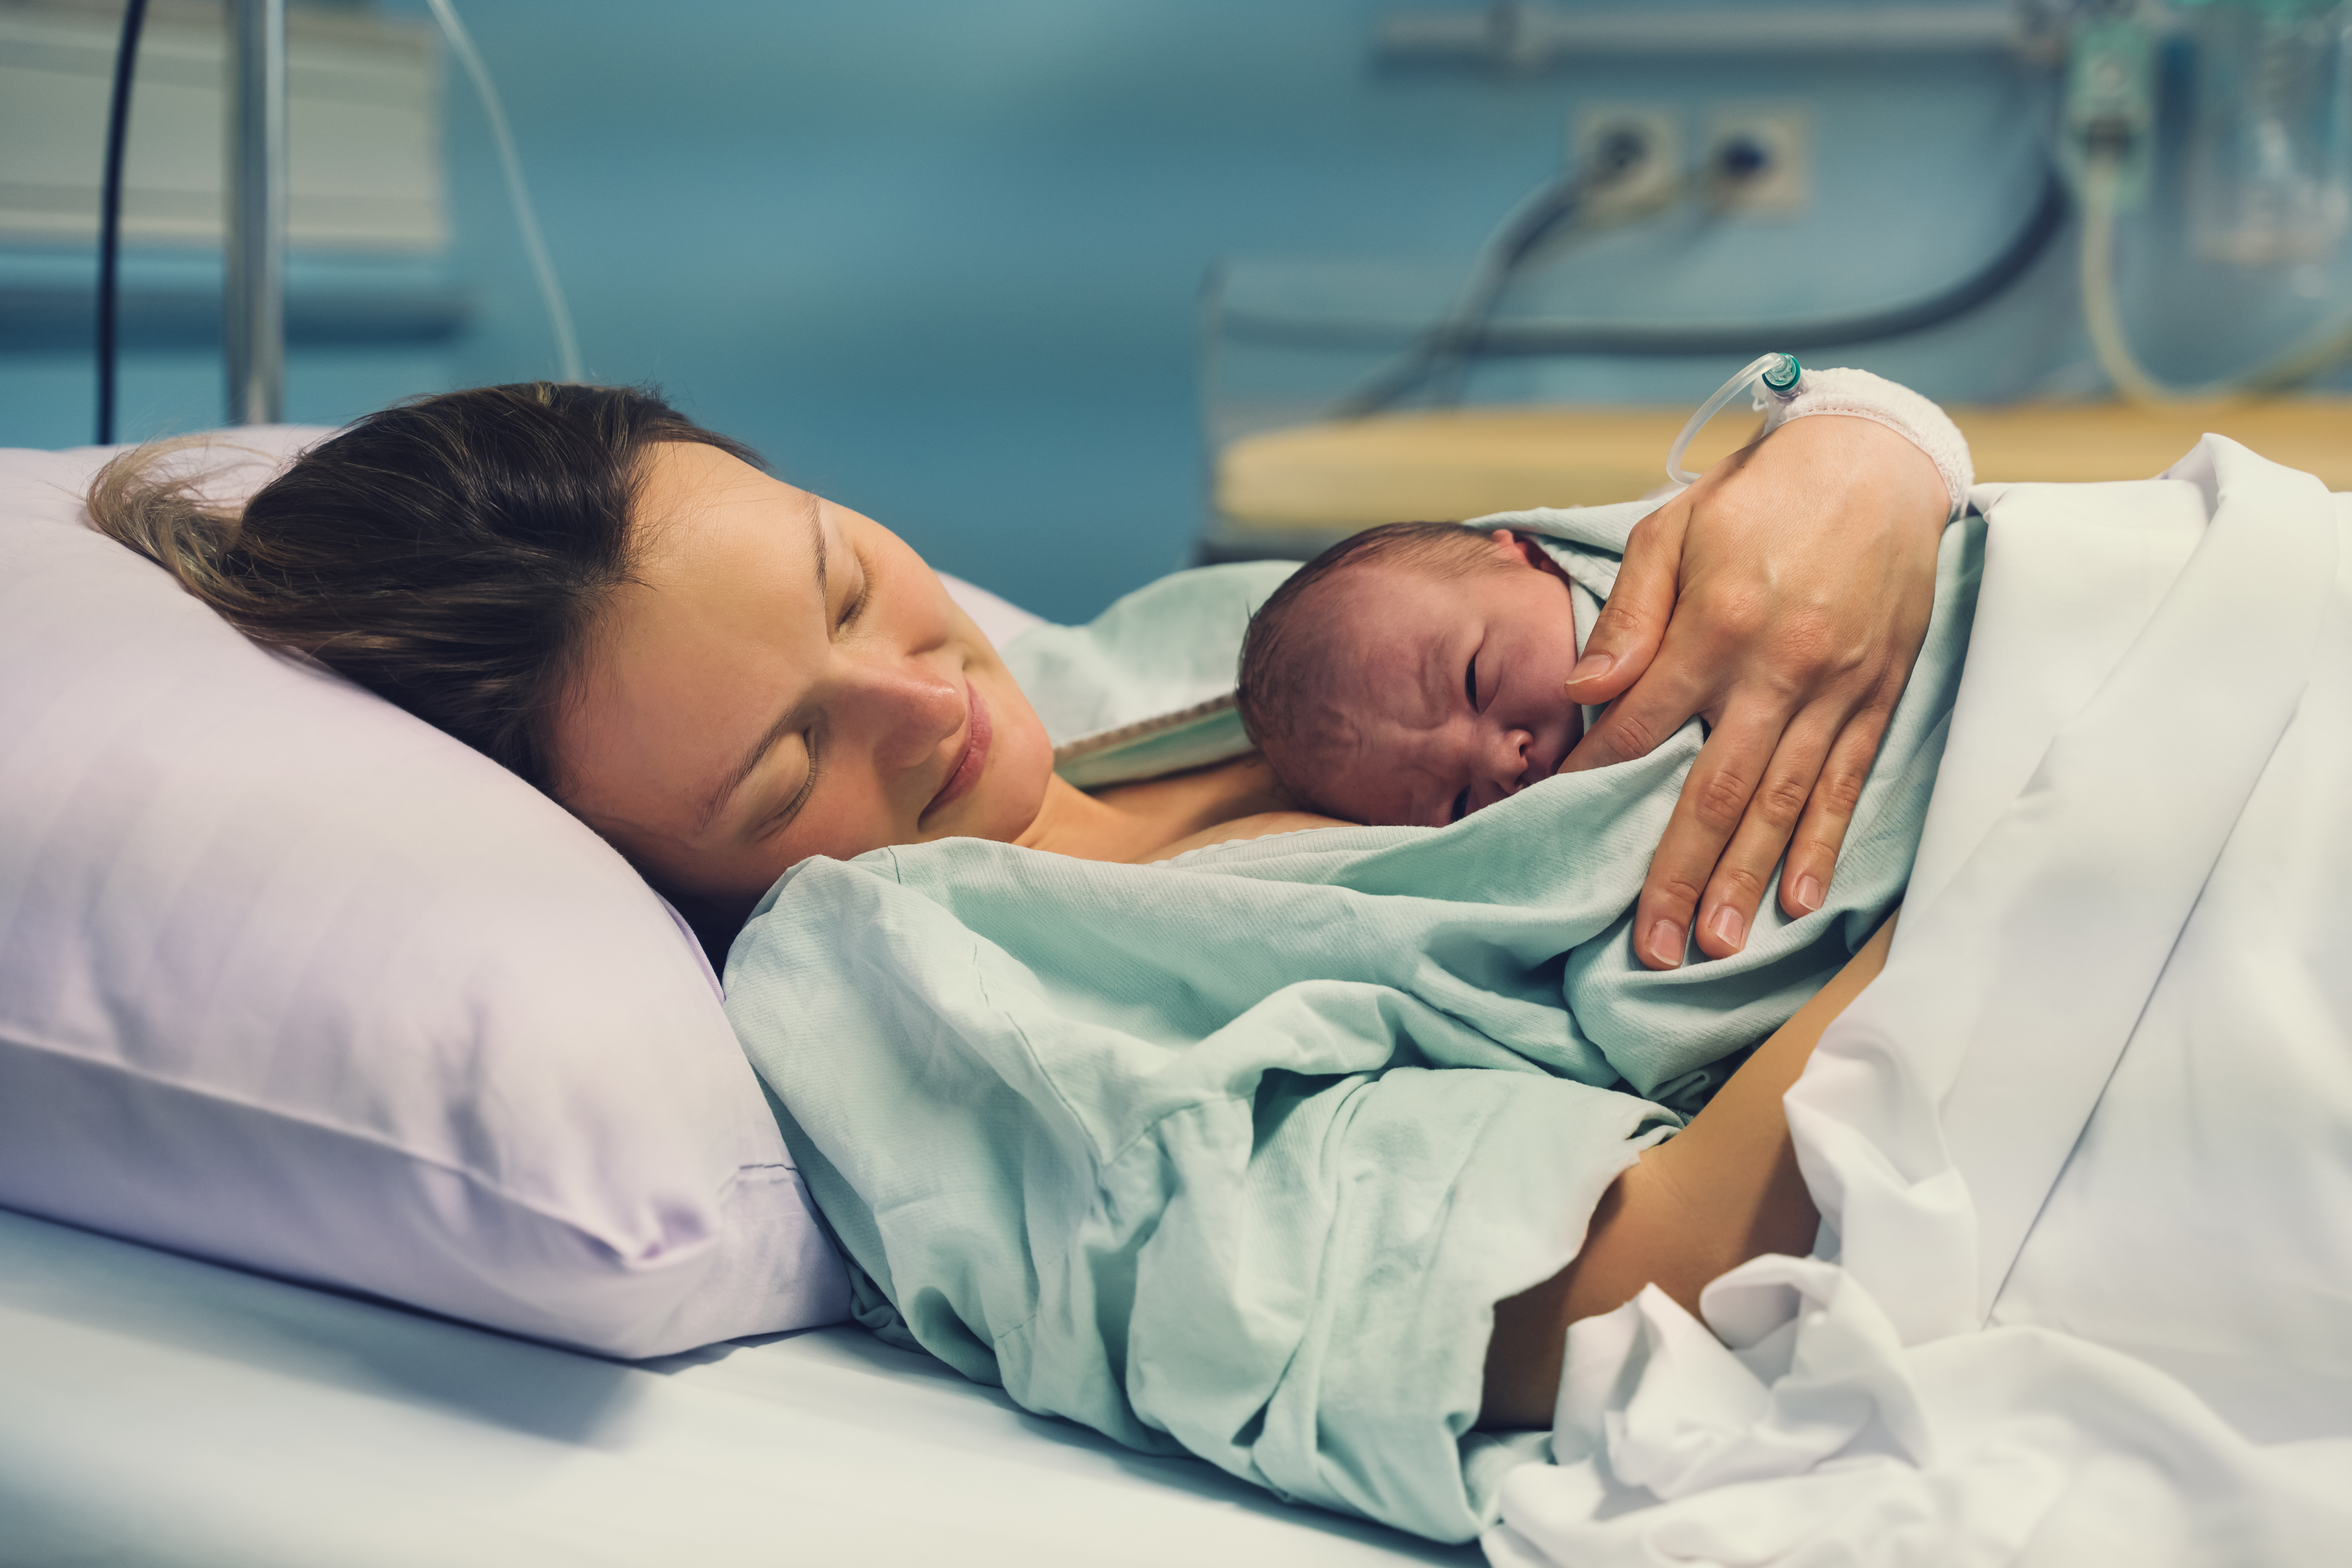 Mom with newborn son after giving birth | Source: Shutterstock.com